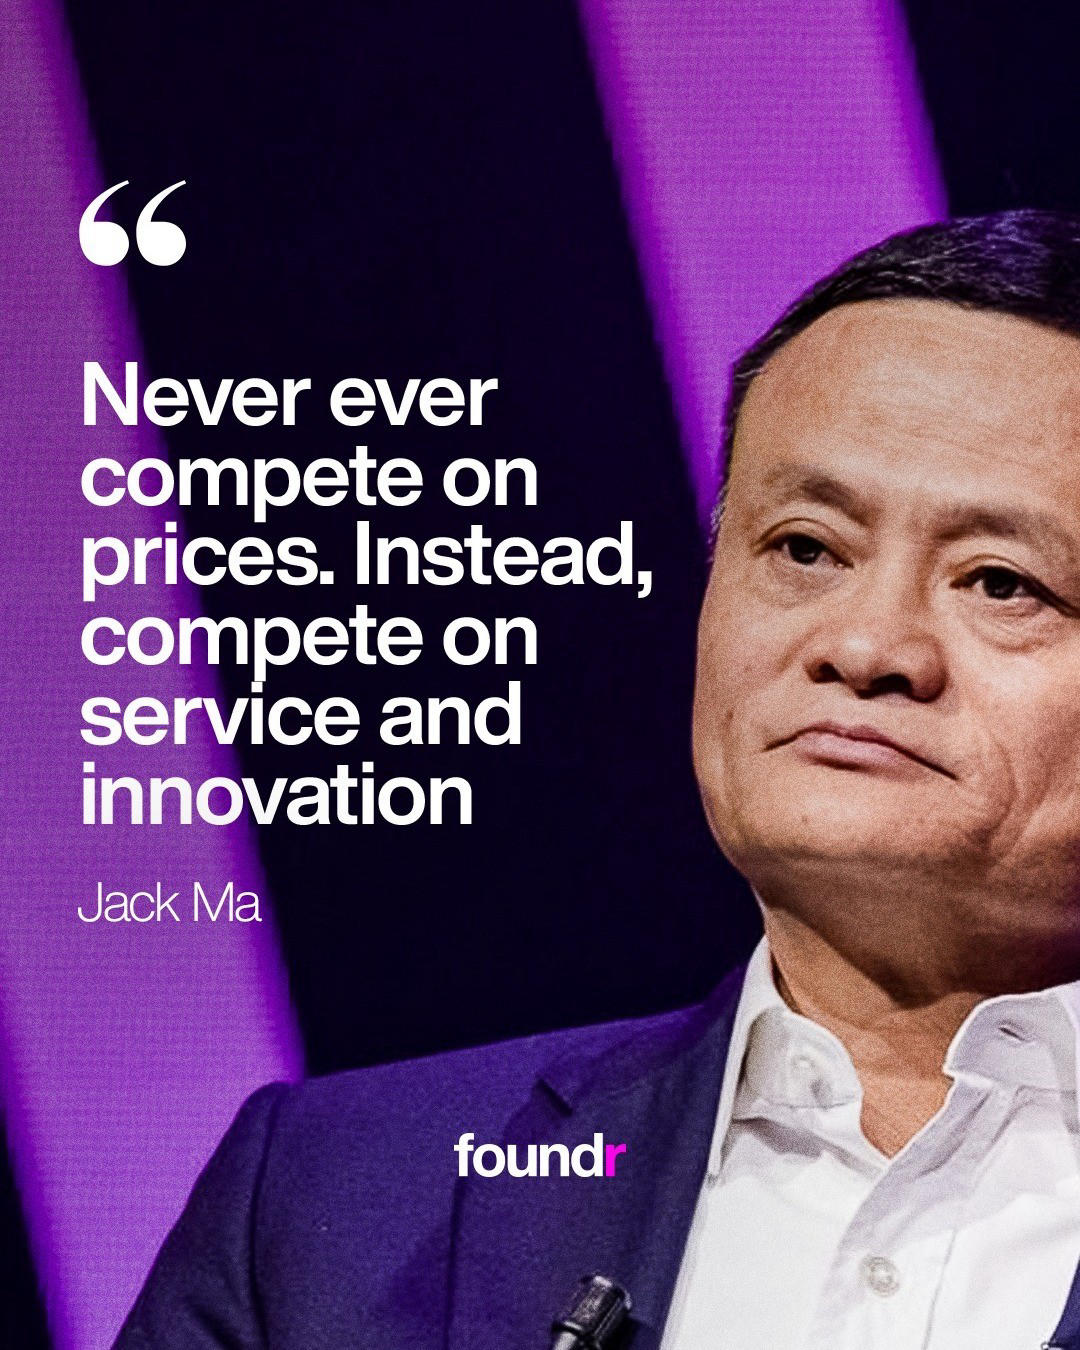 Foundr - Jack Ma Yun is a Chinese business magnate, investor, and philanthropist